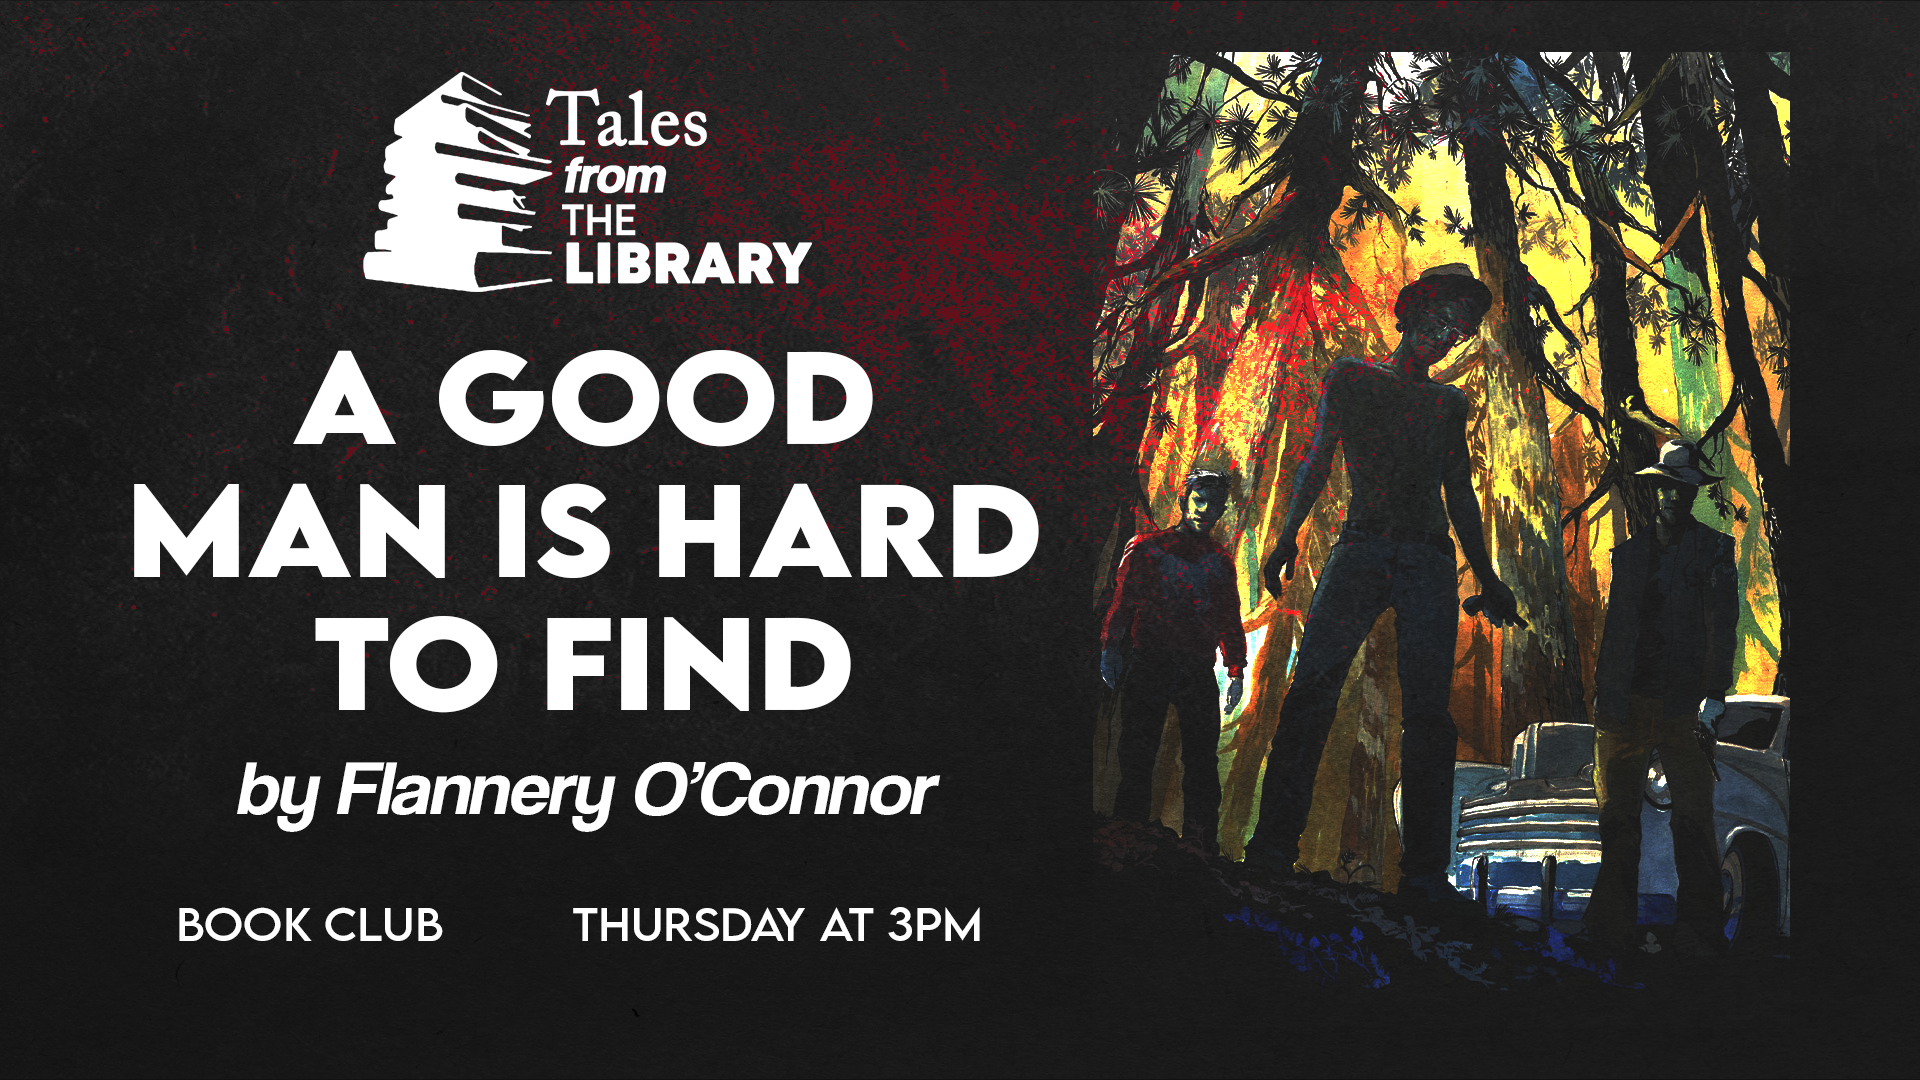 Tales From The Library - A Good Man is Hard to Find